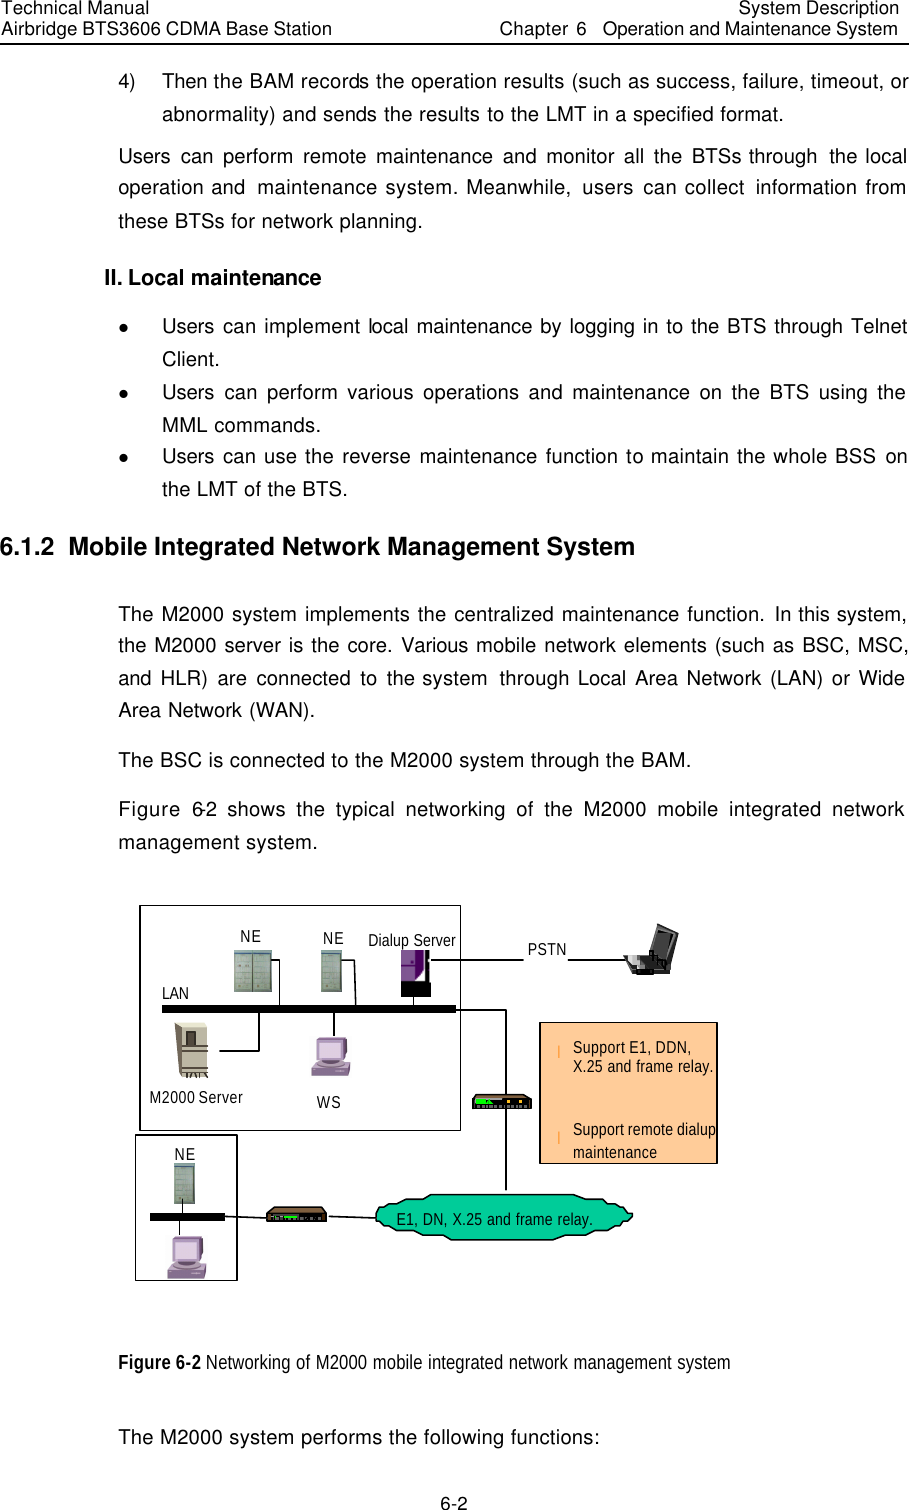 Technical Manual Airbridge BTS3606 CDMA Base Station System Description Chapter 6  Operation and Maintenance System   6-2 4) Then the BAM records the operation results (such as success, failure, timeout, or abnormality) and sends the results to the LMT in a specified format. Users can  perform remote maintenance and monitor all the BTSs through  the local operation and  maintenance system. Meanwhile, users can collect information from these BTSs for network planning. II. Local maintenance l Users can implement local maintenance by logging in to the BTS through Telnet Client.   l Users can perform various operations and maintenance on the BTS using the MML commands. l Users can use the reverse maintenance function to maintain the whole BSS on the LMT of the BTS. 6.1.2  Mobile Integrated Network Management System The M2000 system implements the centralized maintenance function. In this system, the M2000 server is the core. Various mobile network elements (such as BSC, MSC, and HLR) are connected to the system  through Local Area Network (LAN) or Wide Area Network (WAN). The BSC is connected to the M2000 system through the BAM. Figure 6-2 shows the typical networking of the M2000 mobile integrated network management system. E1, DN, X.25 and frame relay.Dialup ServerLANNE NEM2000 Server WSllSupport remote dialup maintenanceNEPSTNSupport E1, DDN,X.25 and frame relay. Figure 6-2 Networking of M2000 mobile integrated network management system The M2000 system performs the following functions:   